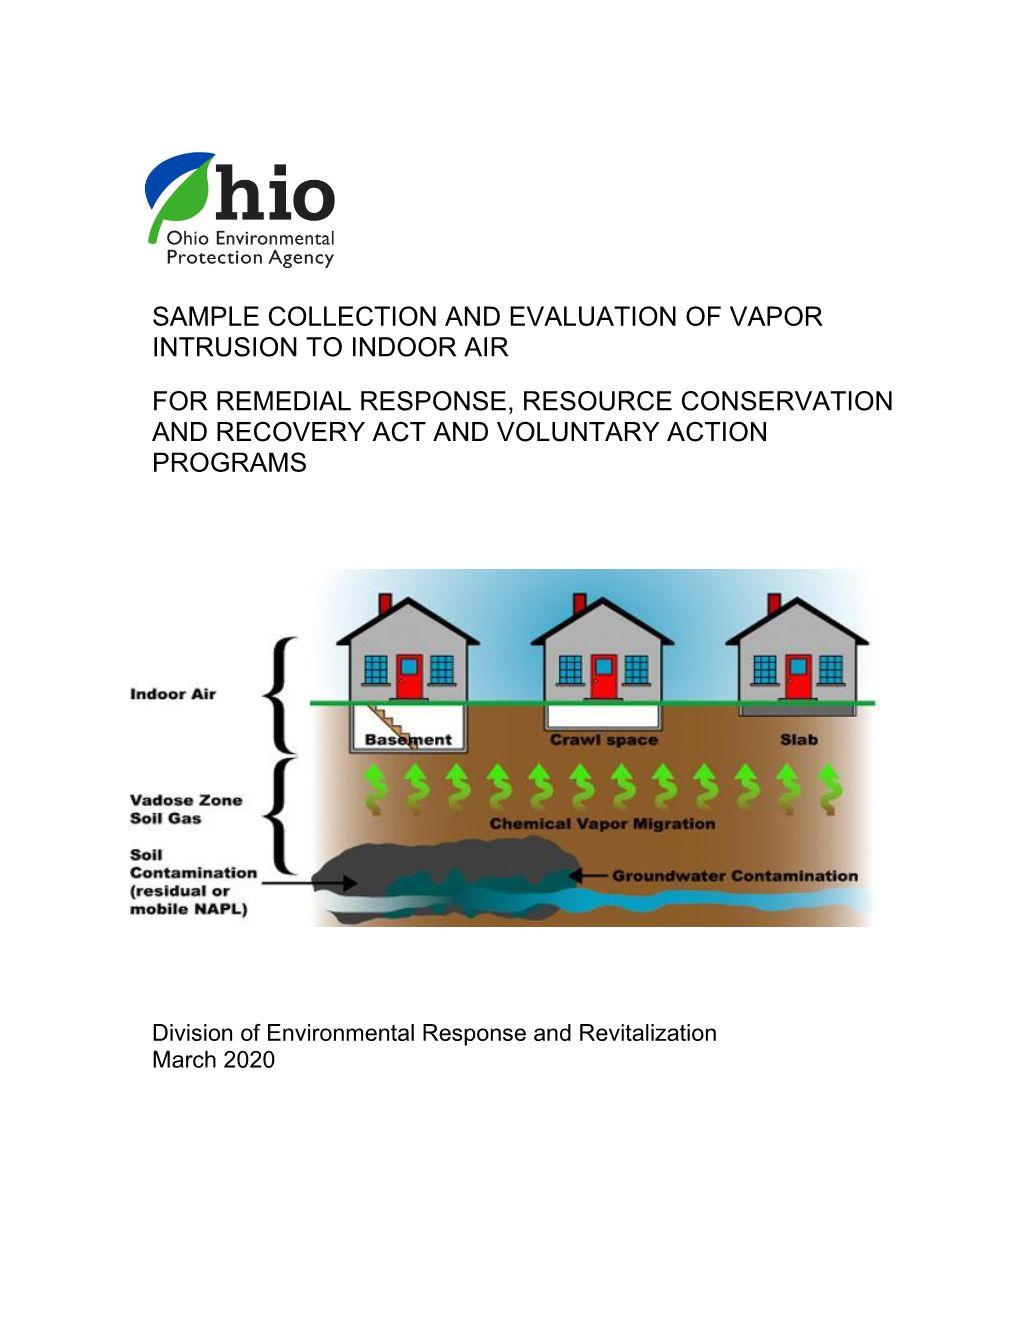 Sample Collection and Evaluation of Vapor Intrusion to Indoor Air for Remedial Response, Resource Conservation and Recovery Act and Voluntary Action Programs